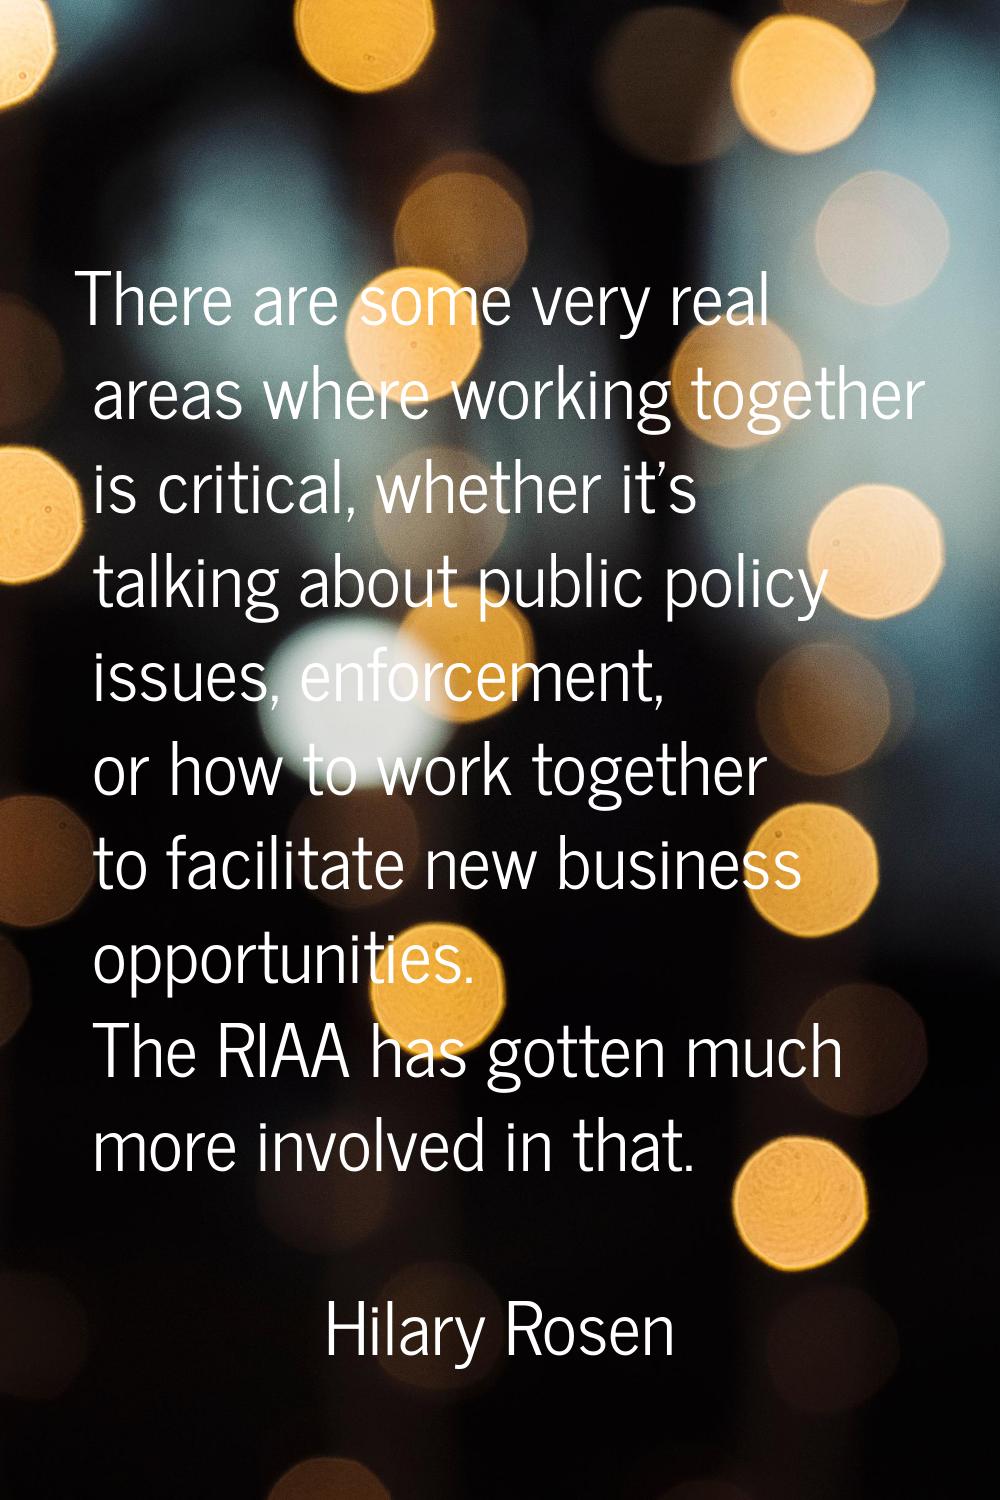 There are some very real areas where working together is critical, whether it's talking about publi